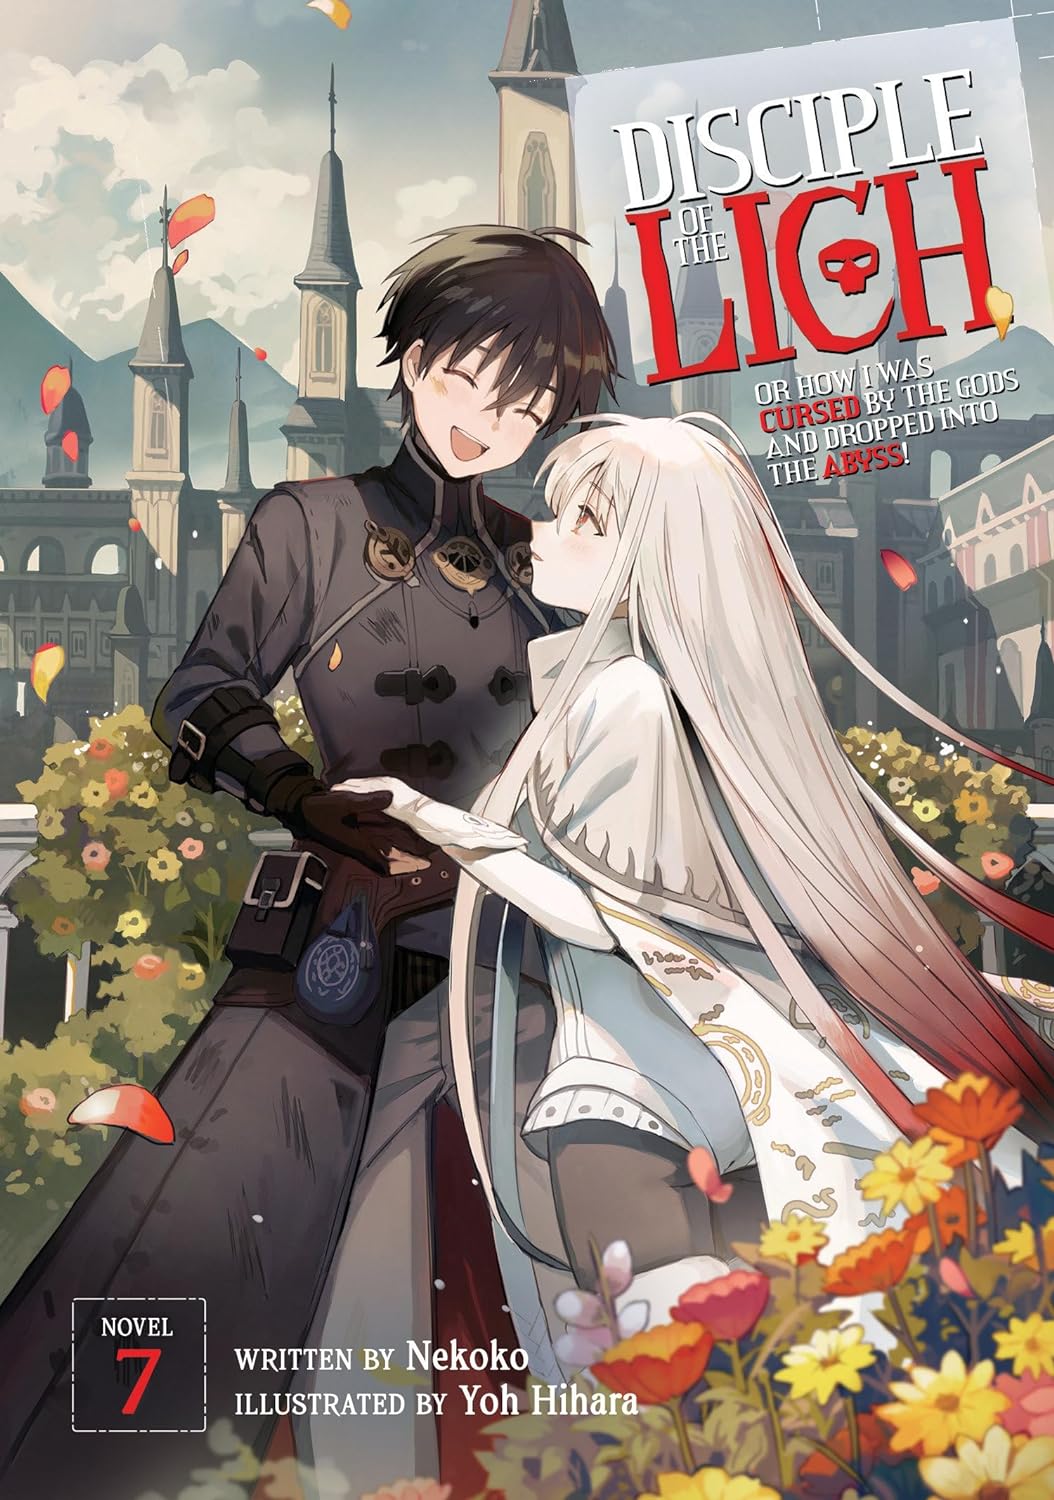 (11/06/2024) Disciple of the Lich: Or How I Was Cursed by the Gods and Dropped Into the Abyss! (Light Novel) Vol. 07